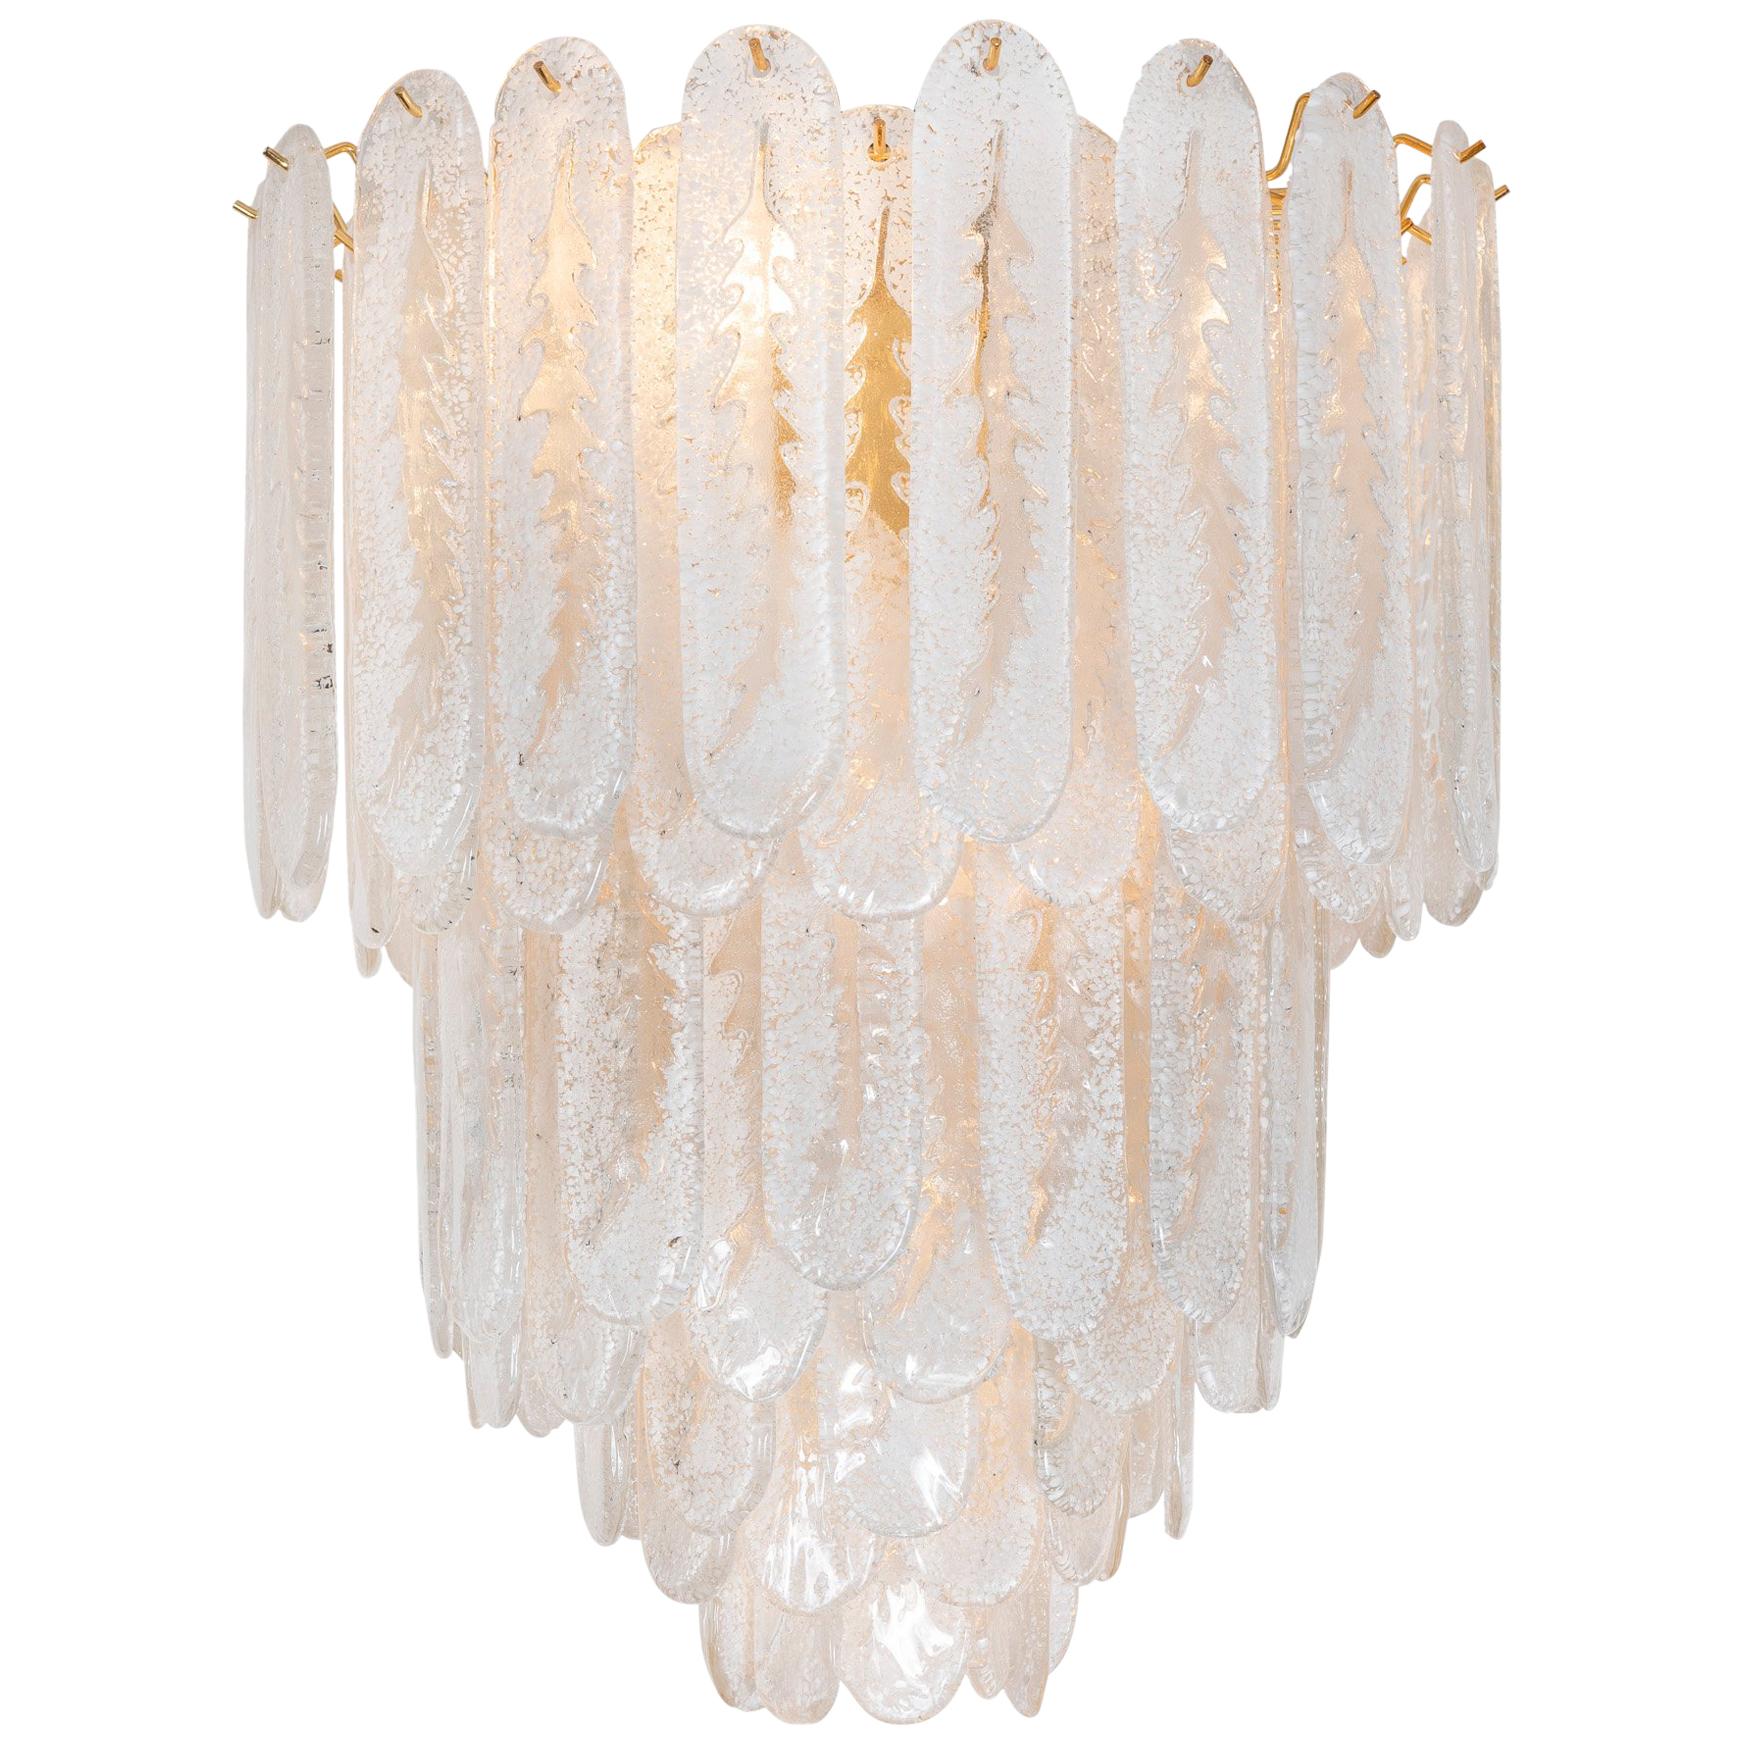 Vintage Frosted Glass Murano Pendant Light